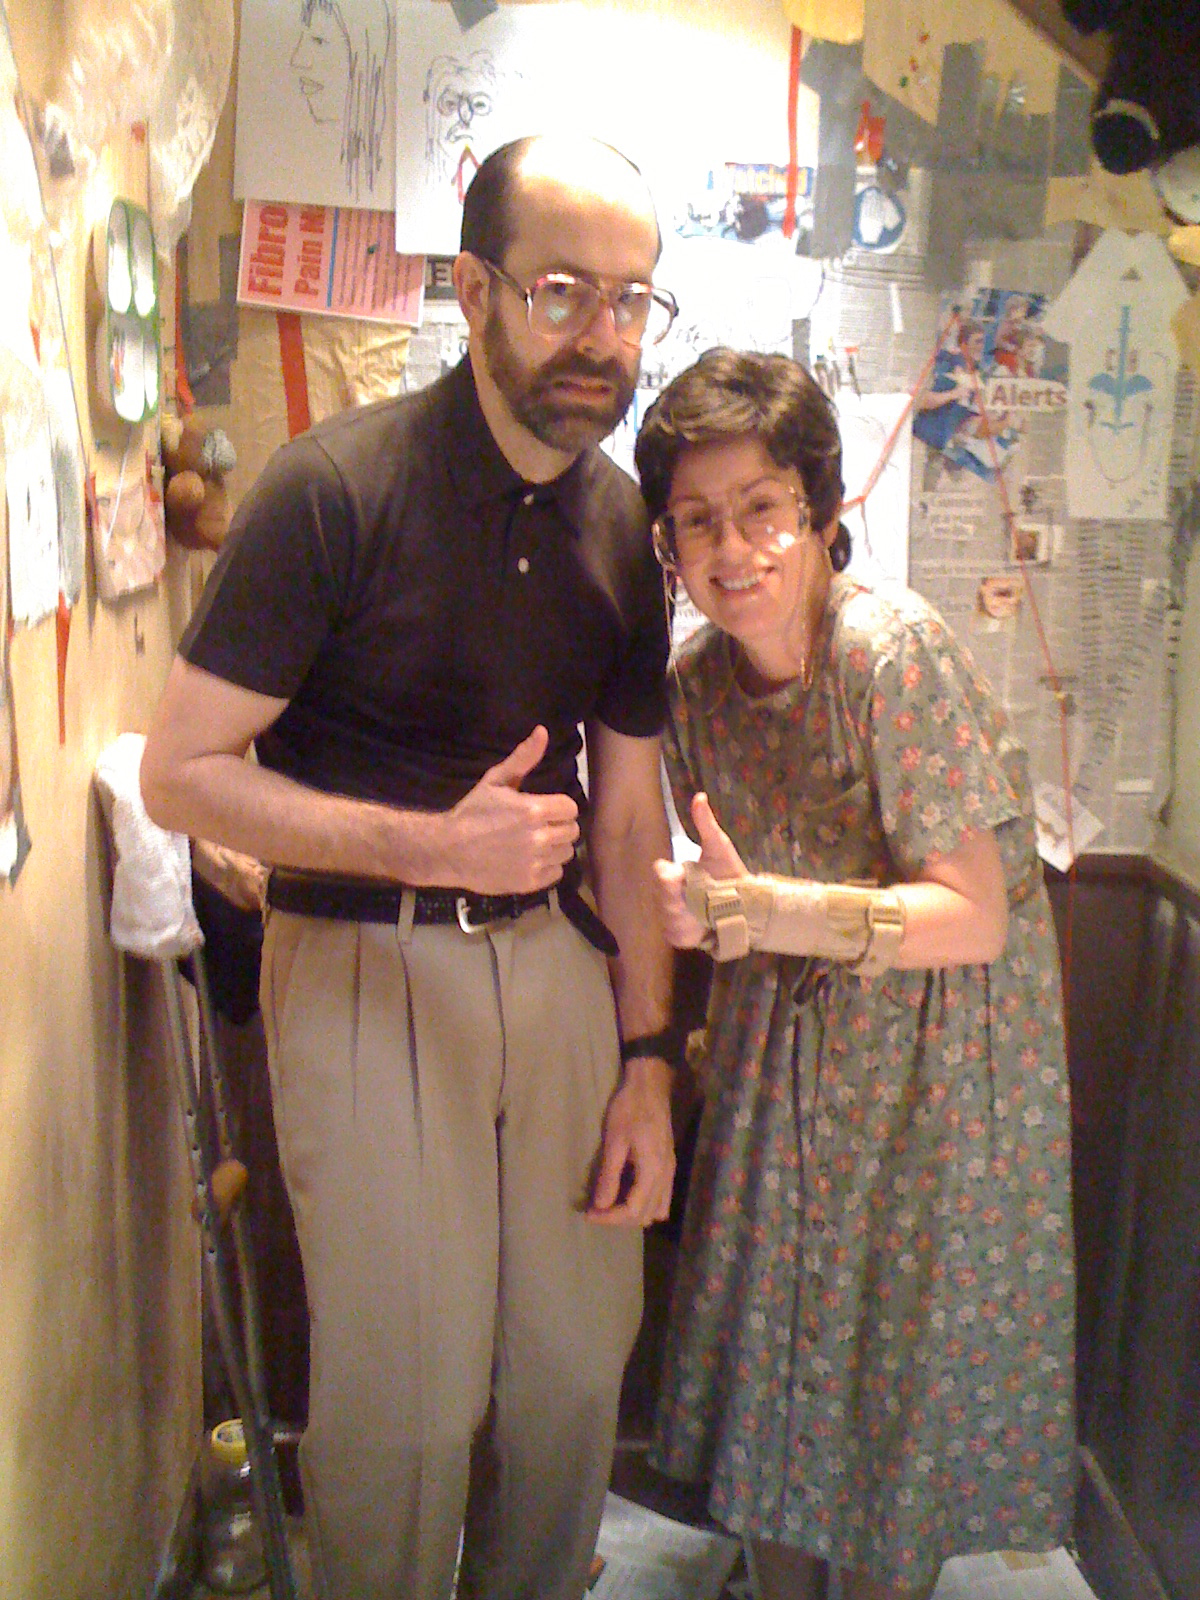 Childrens Hospital, Episode 203: Chet (Brian Huskey) and the Chief (Megan Mullaly) in Chet's secret basement.